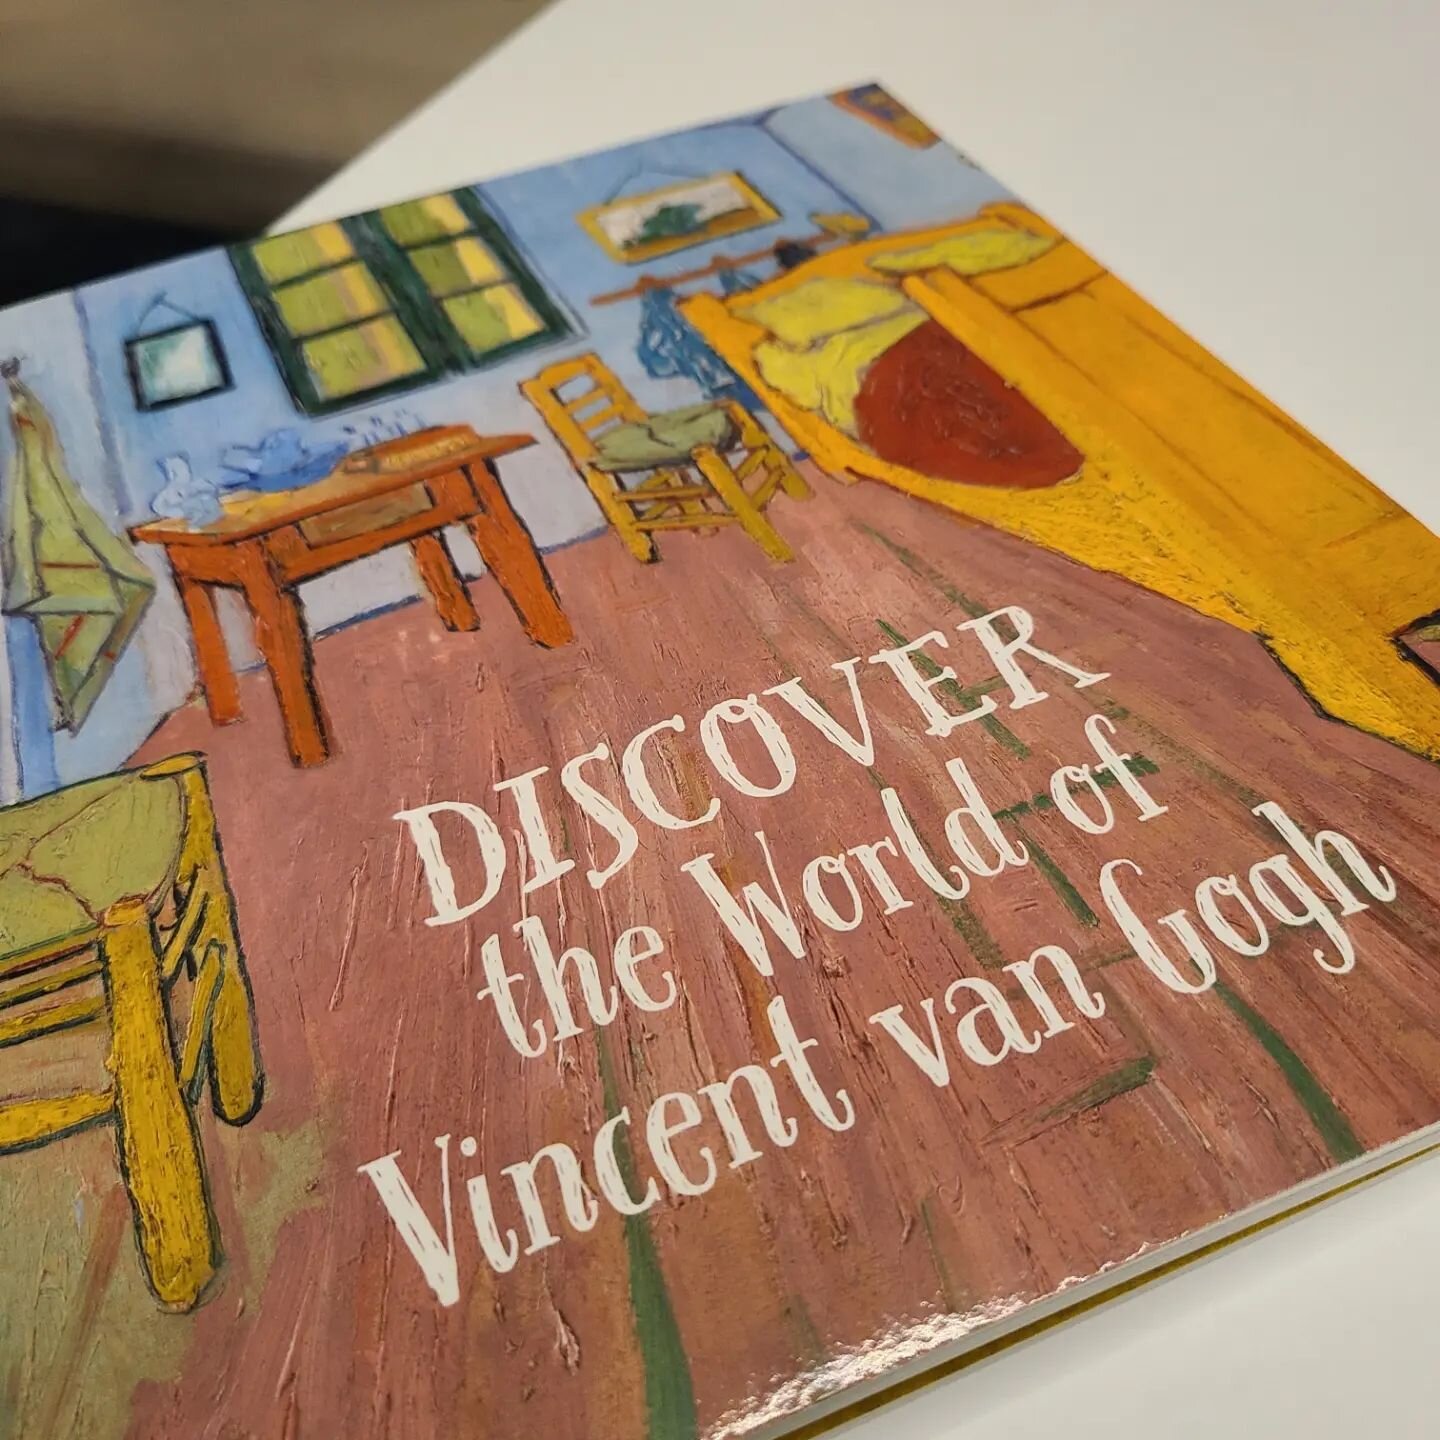 Collecting lesson material while on vacation in Amsterdam!  The Van Gogh museum was inspiring!!! I can't wait to get back to the office and develop a new Van Gogh unit for my students! - Amy